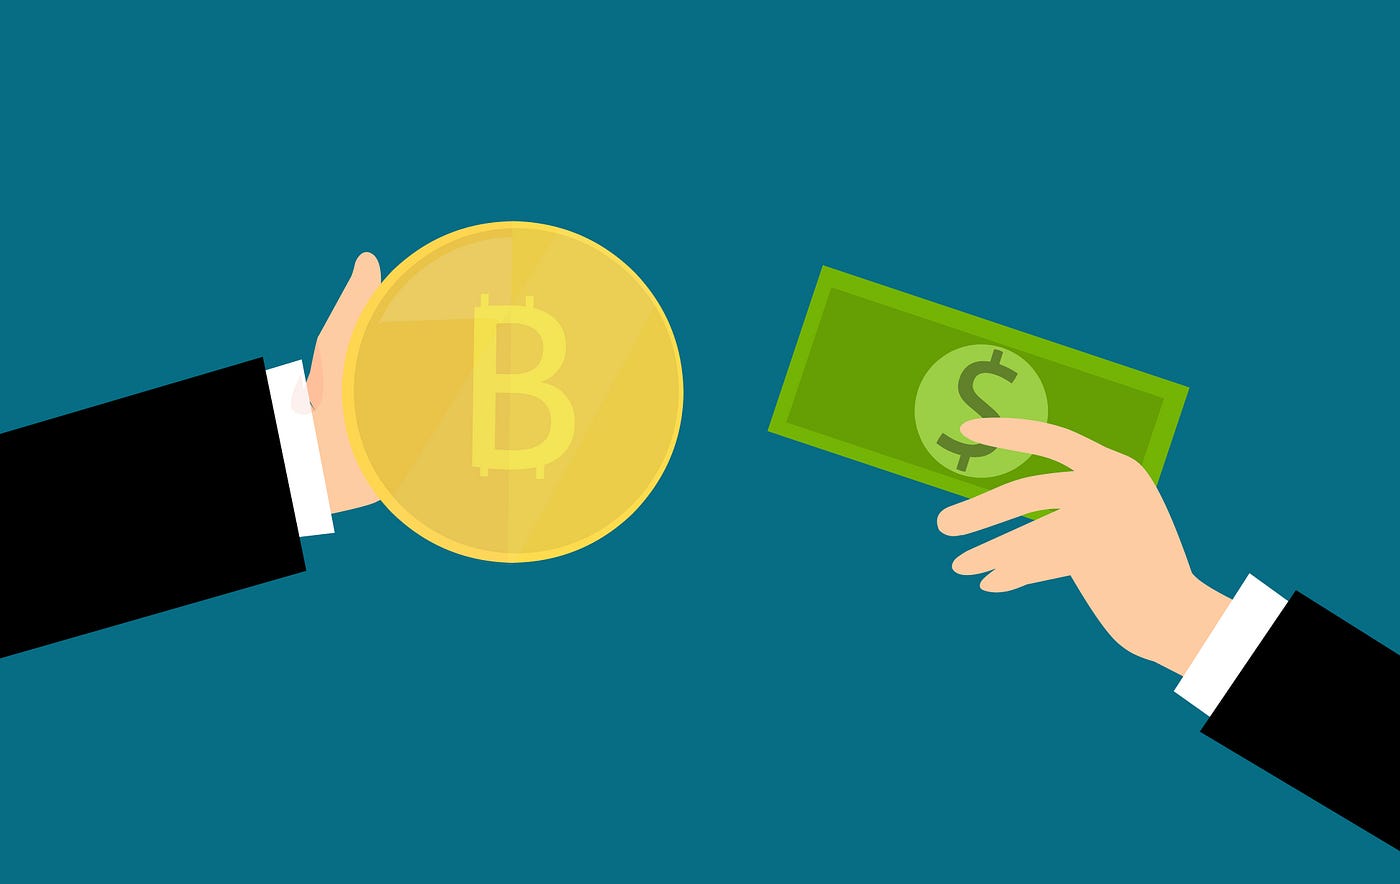 Making The Right Move: Key Factors To Consider Before Deciding To Buy Bitcoin